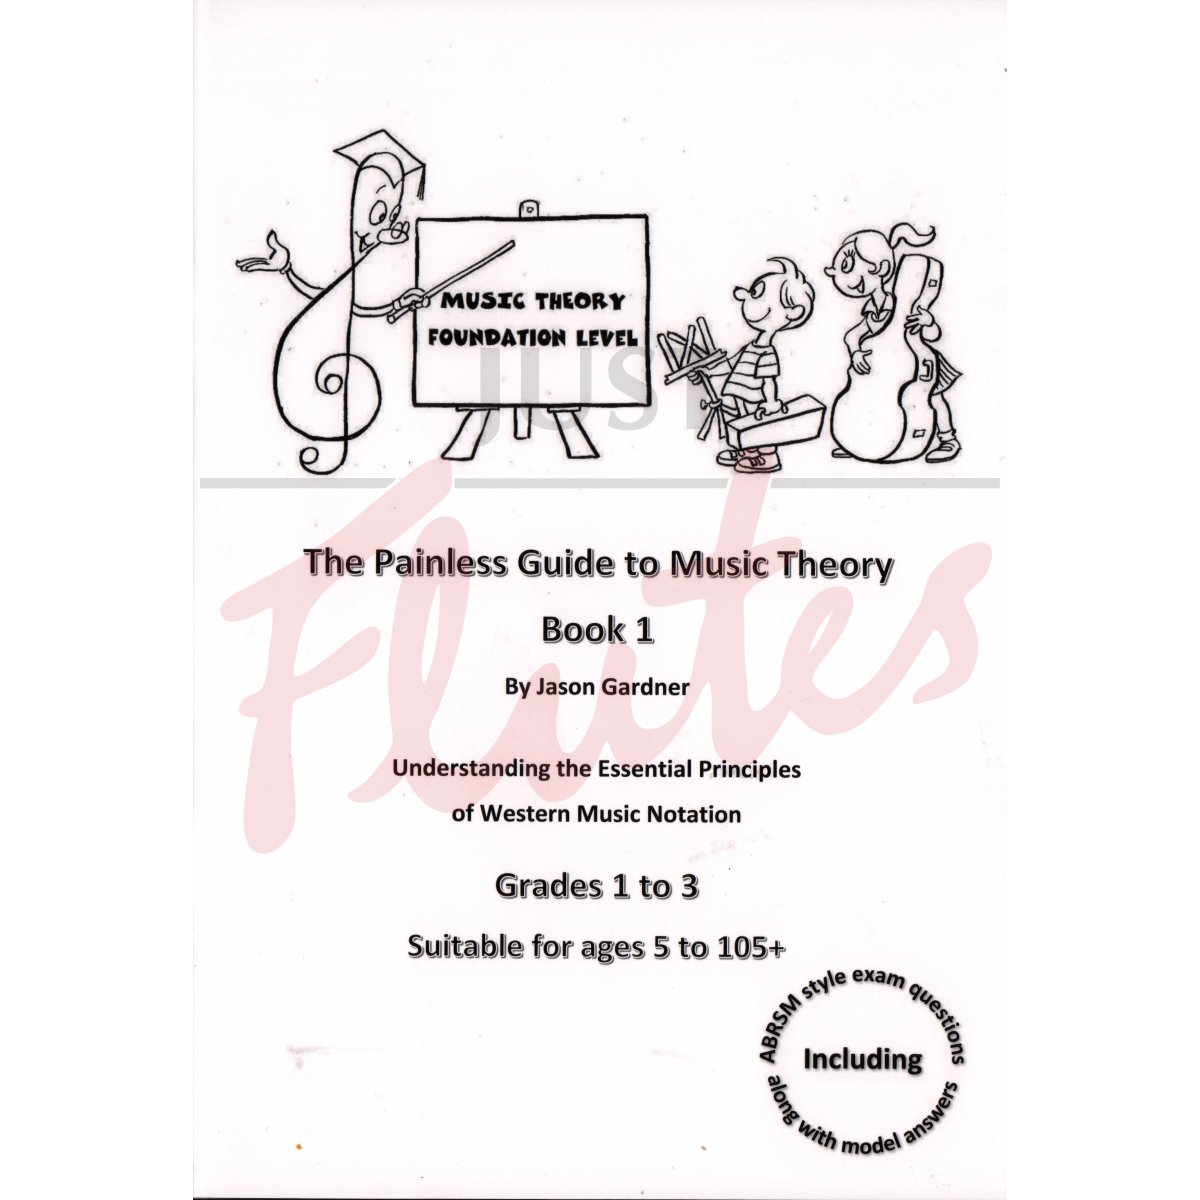 The Painless Guide to Music Theory Book 1 Grades 1-3